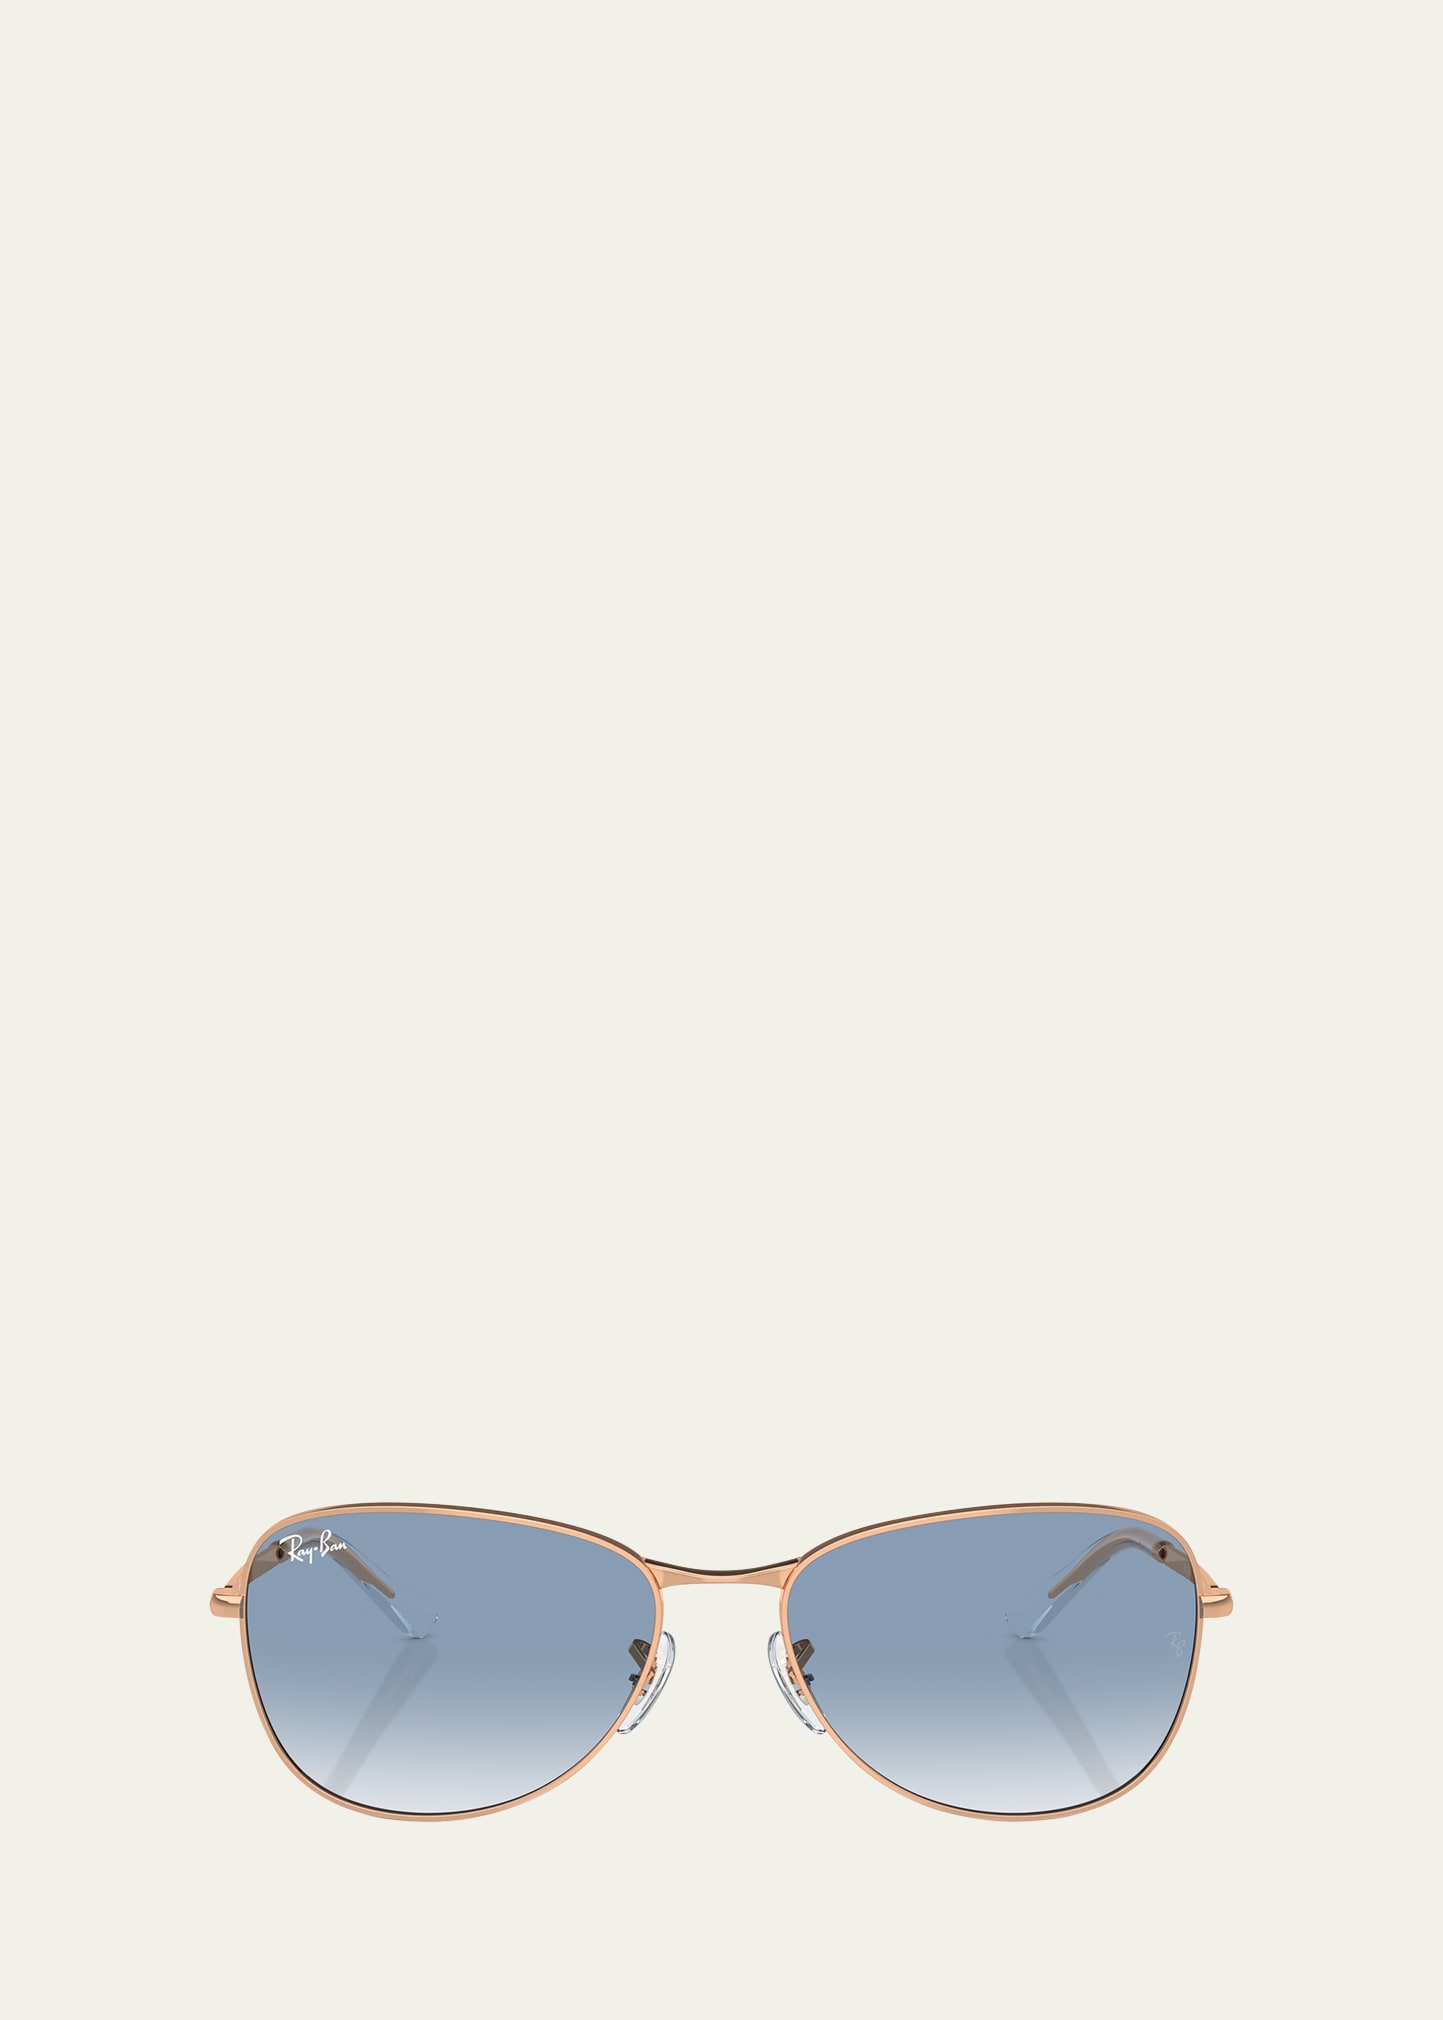 Rounded Metal Square Sunglasses, 59mm